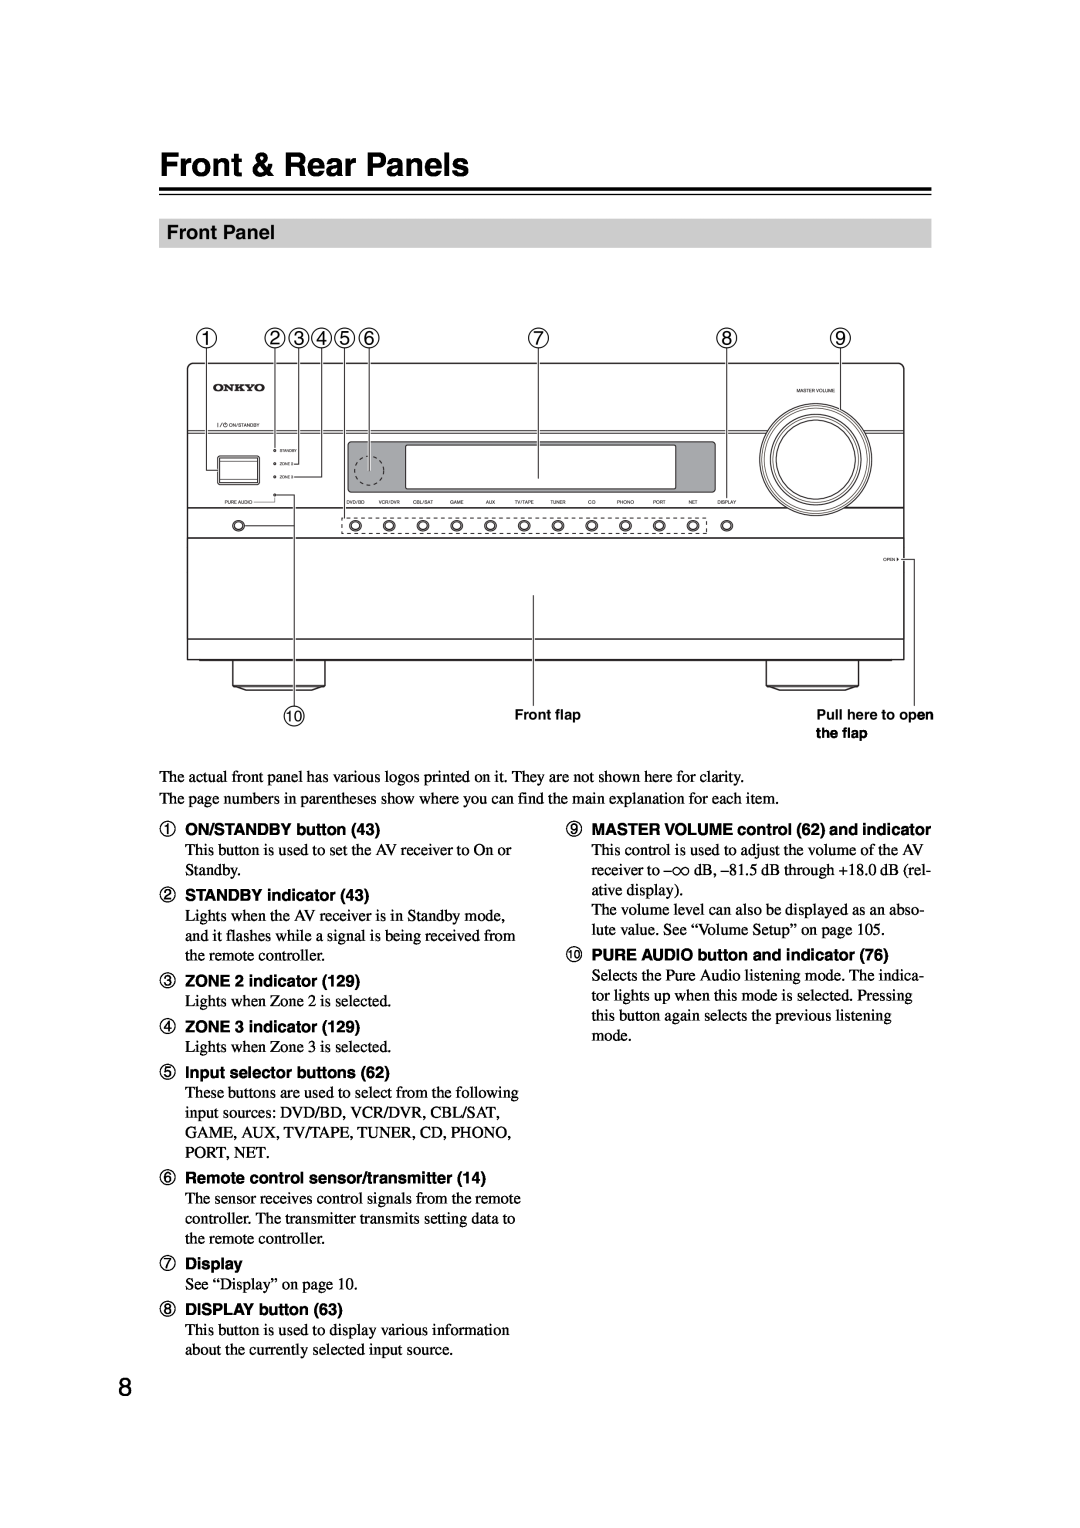 Onkyo TX-NR1007 instruction manual Front & Rear Panels, bcdef, Front Panel 